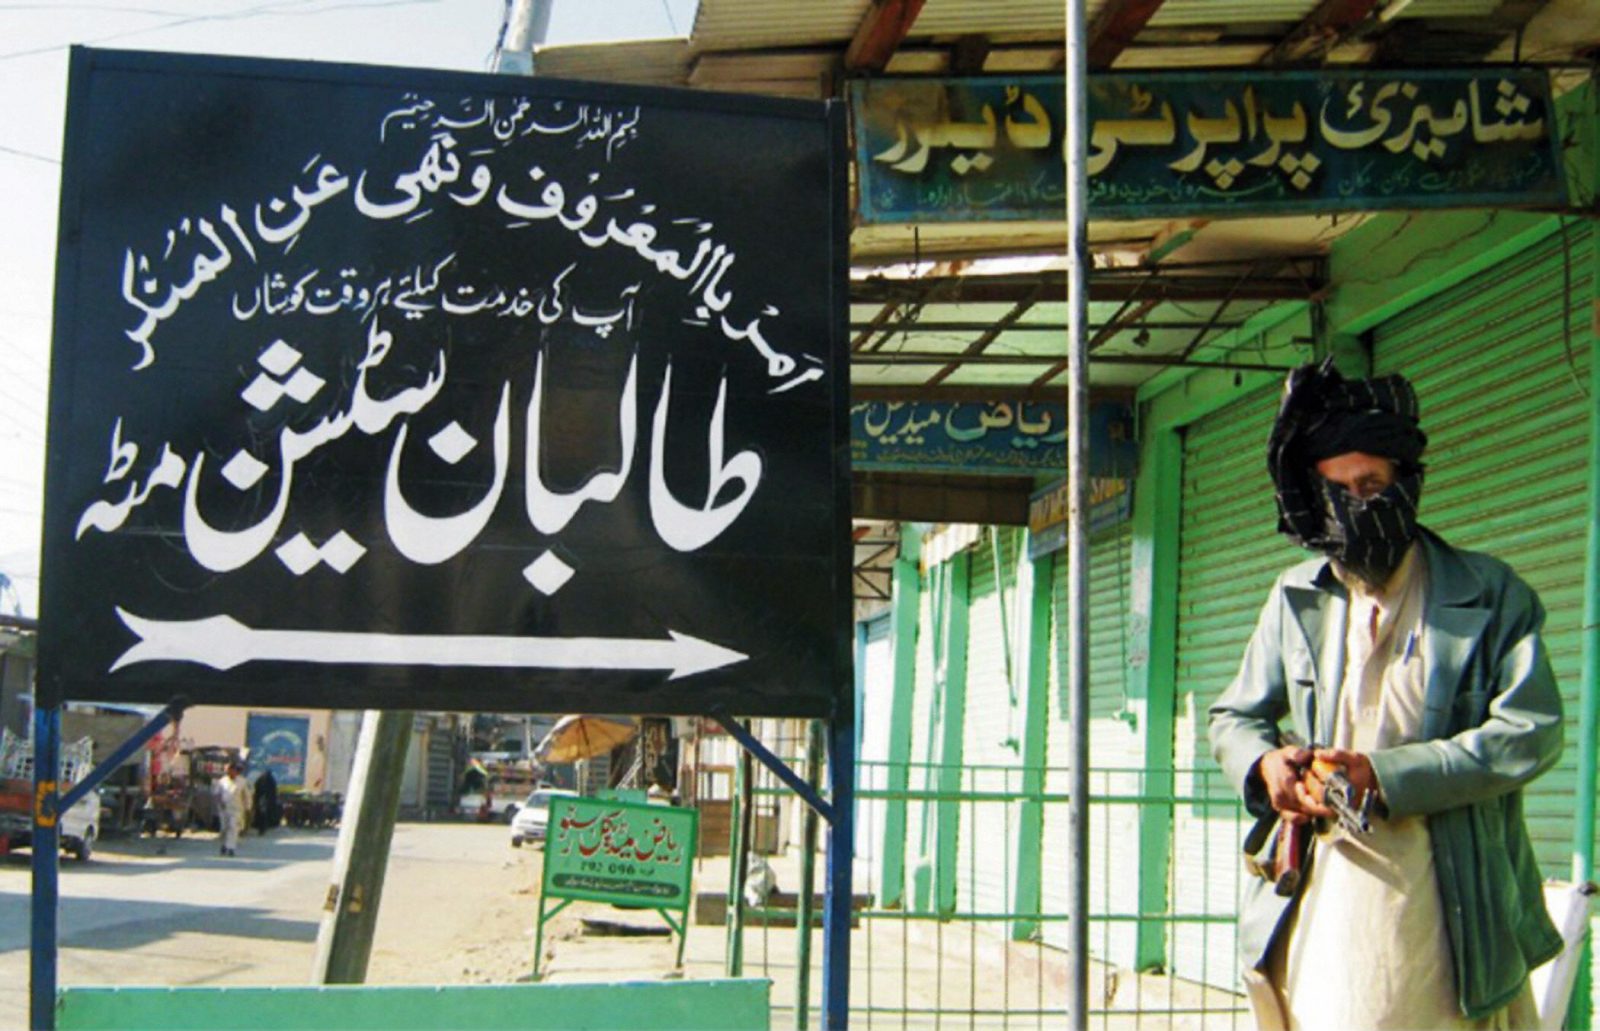 pro-Taliban militant standing by sign reading "Taliban Station"